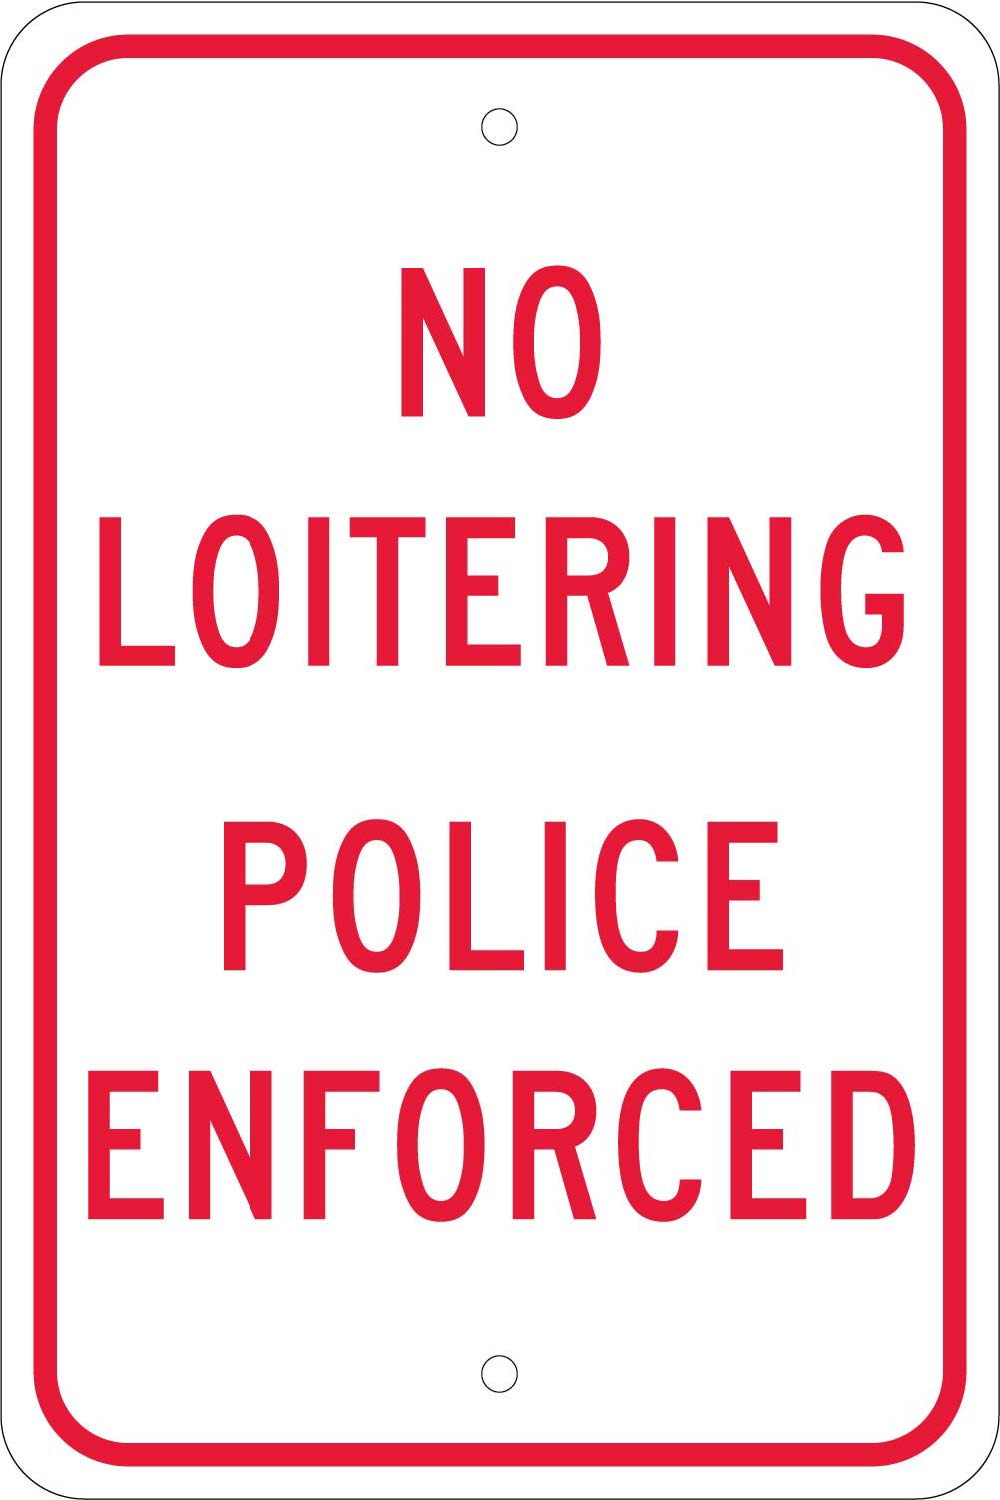 No Loitering Police Enforced Sign-eSafety Supplies, Inc